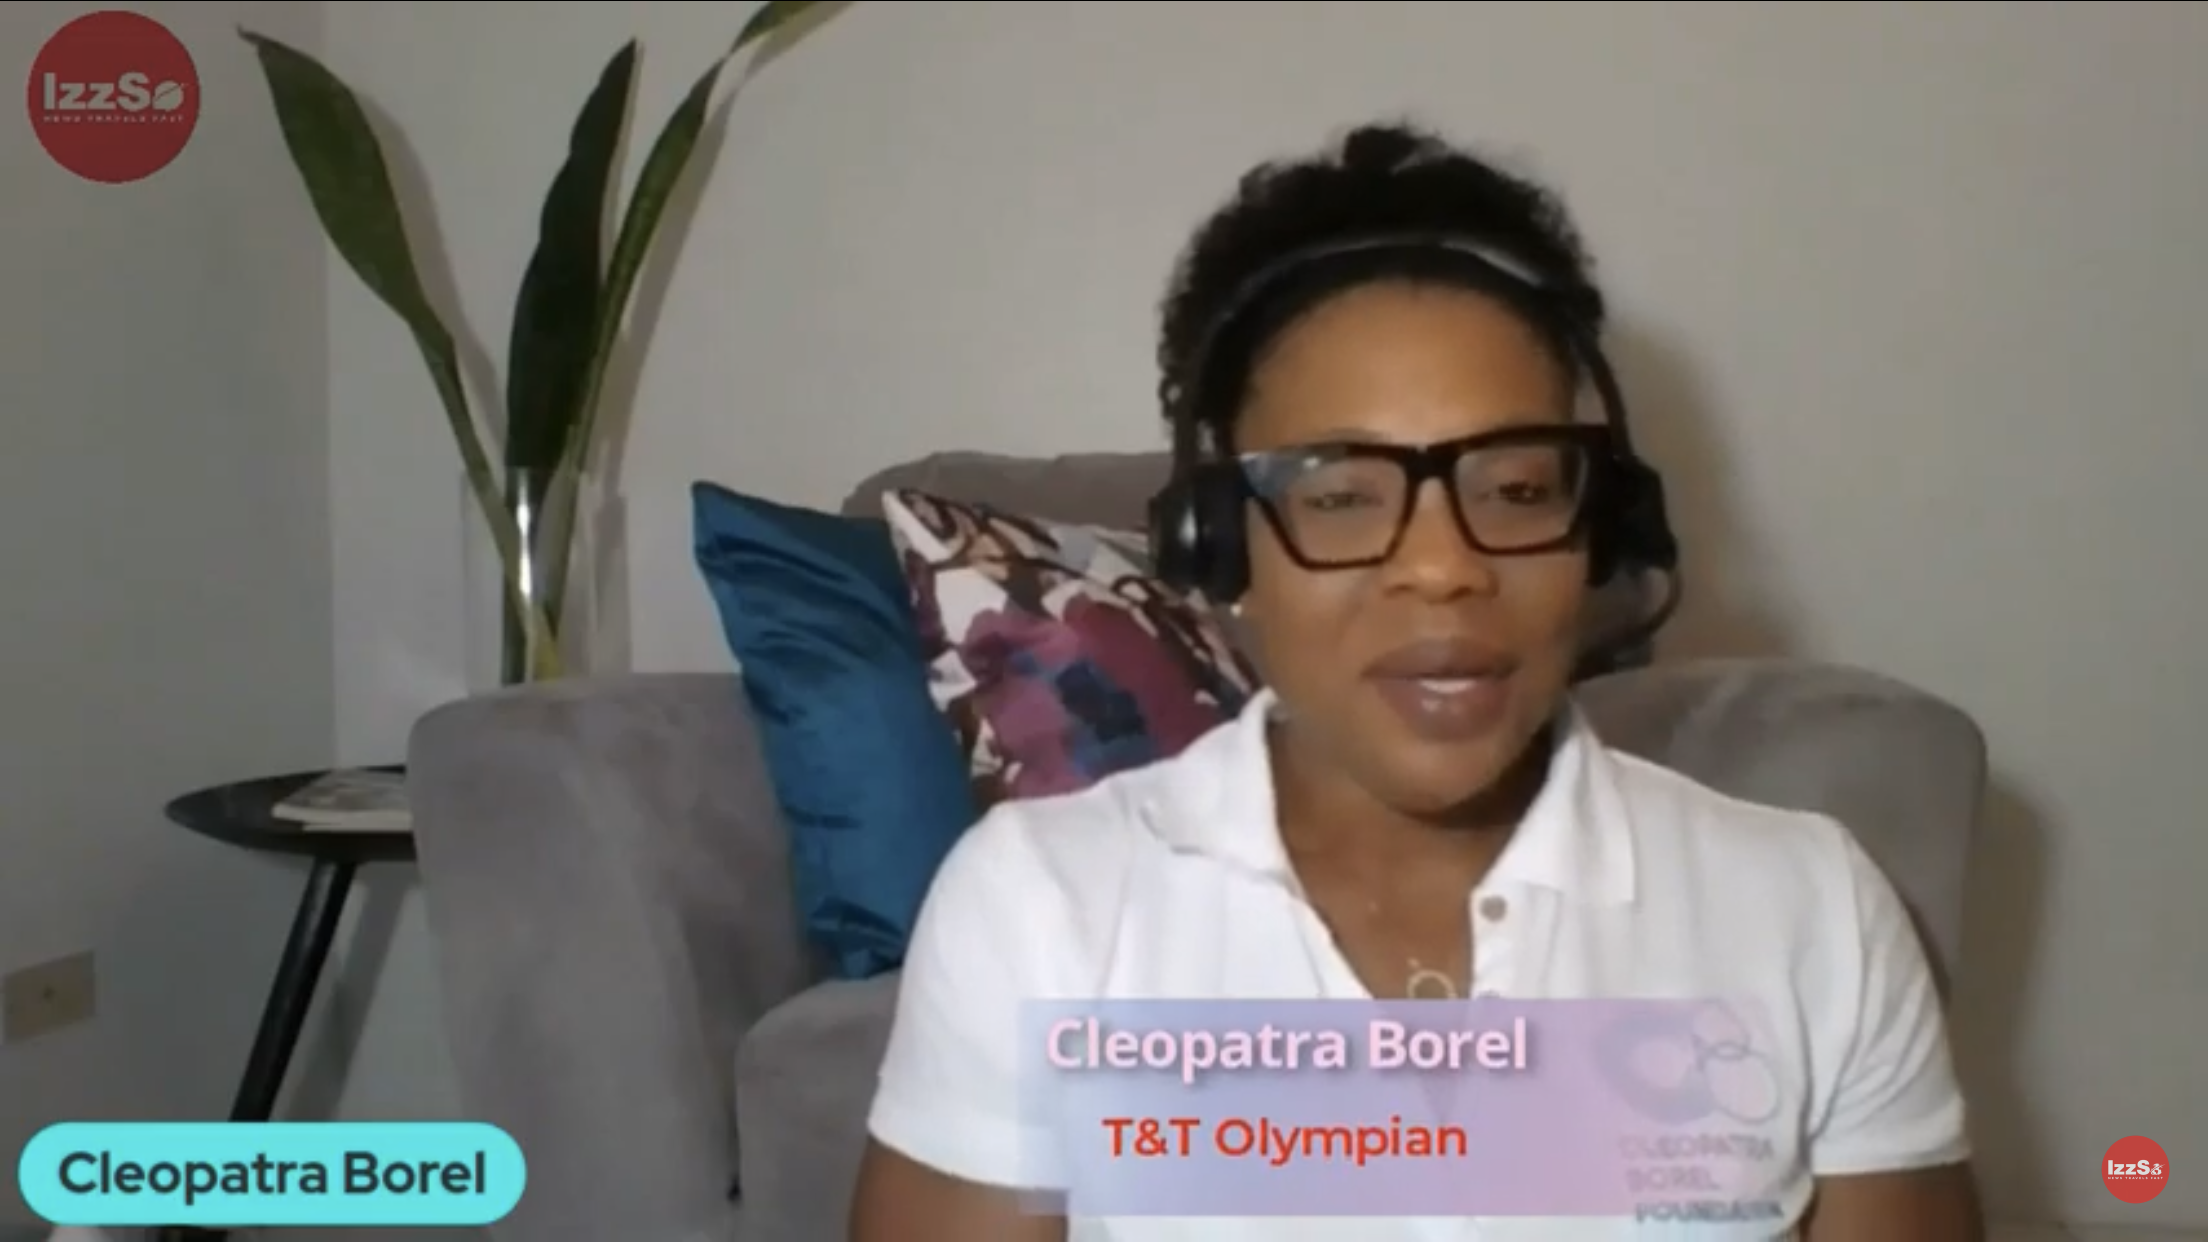 T&T Olympian Cleopatra Borel: We must teach our boys and men about respect and boundaries